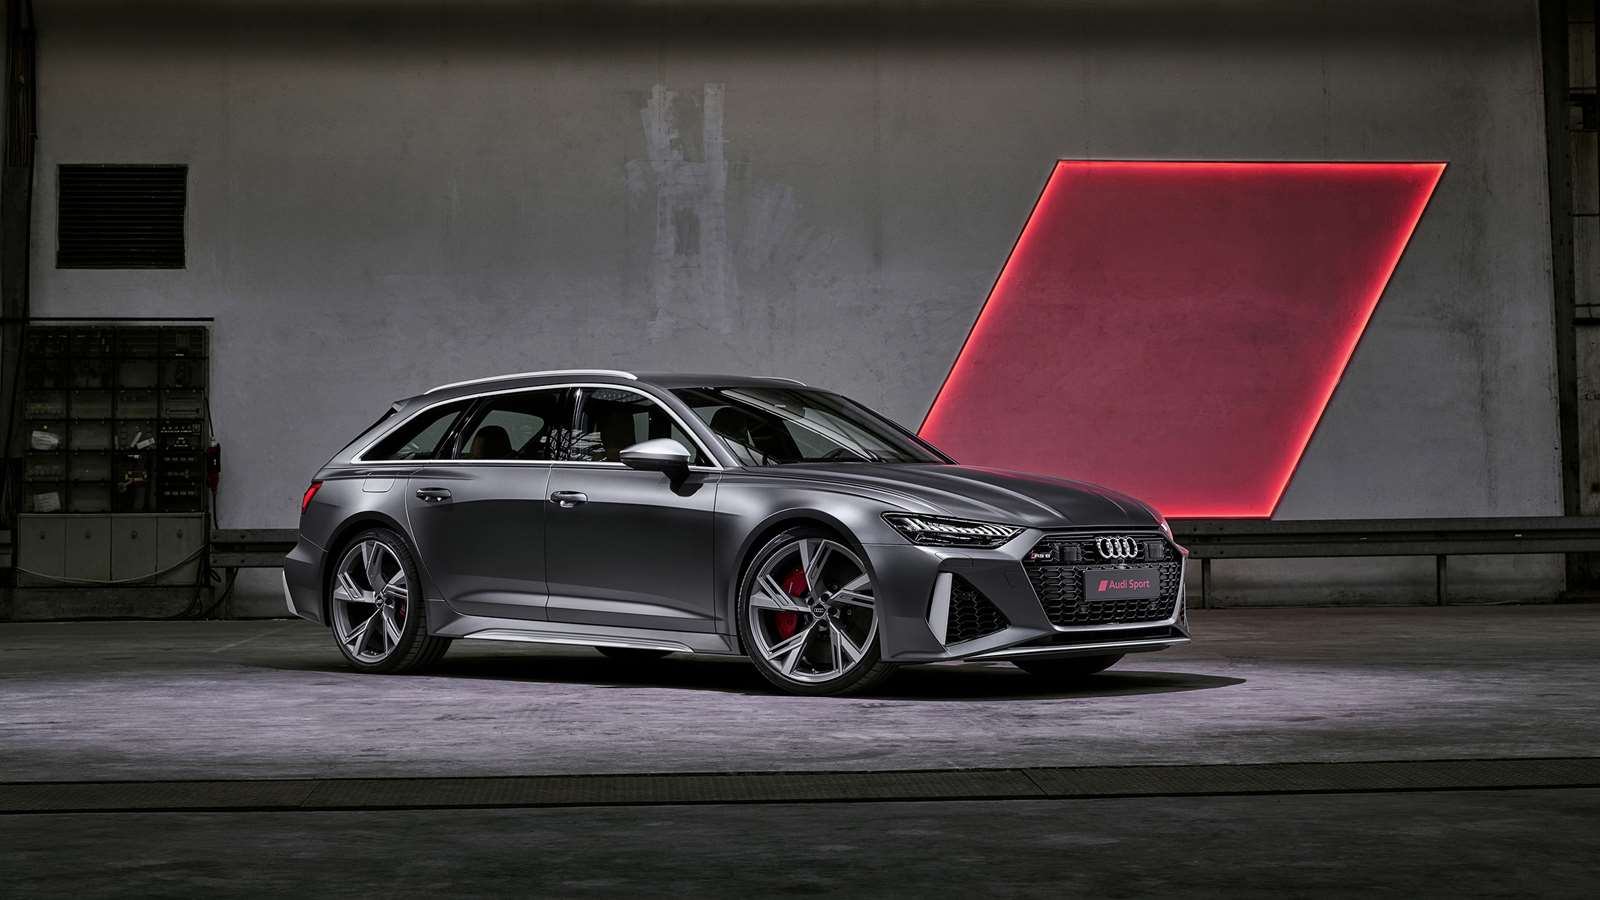 The new Audi RS6 reaffirms the greatness of the fast estate